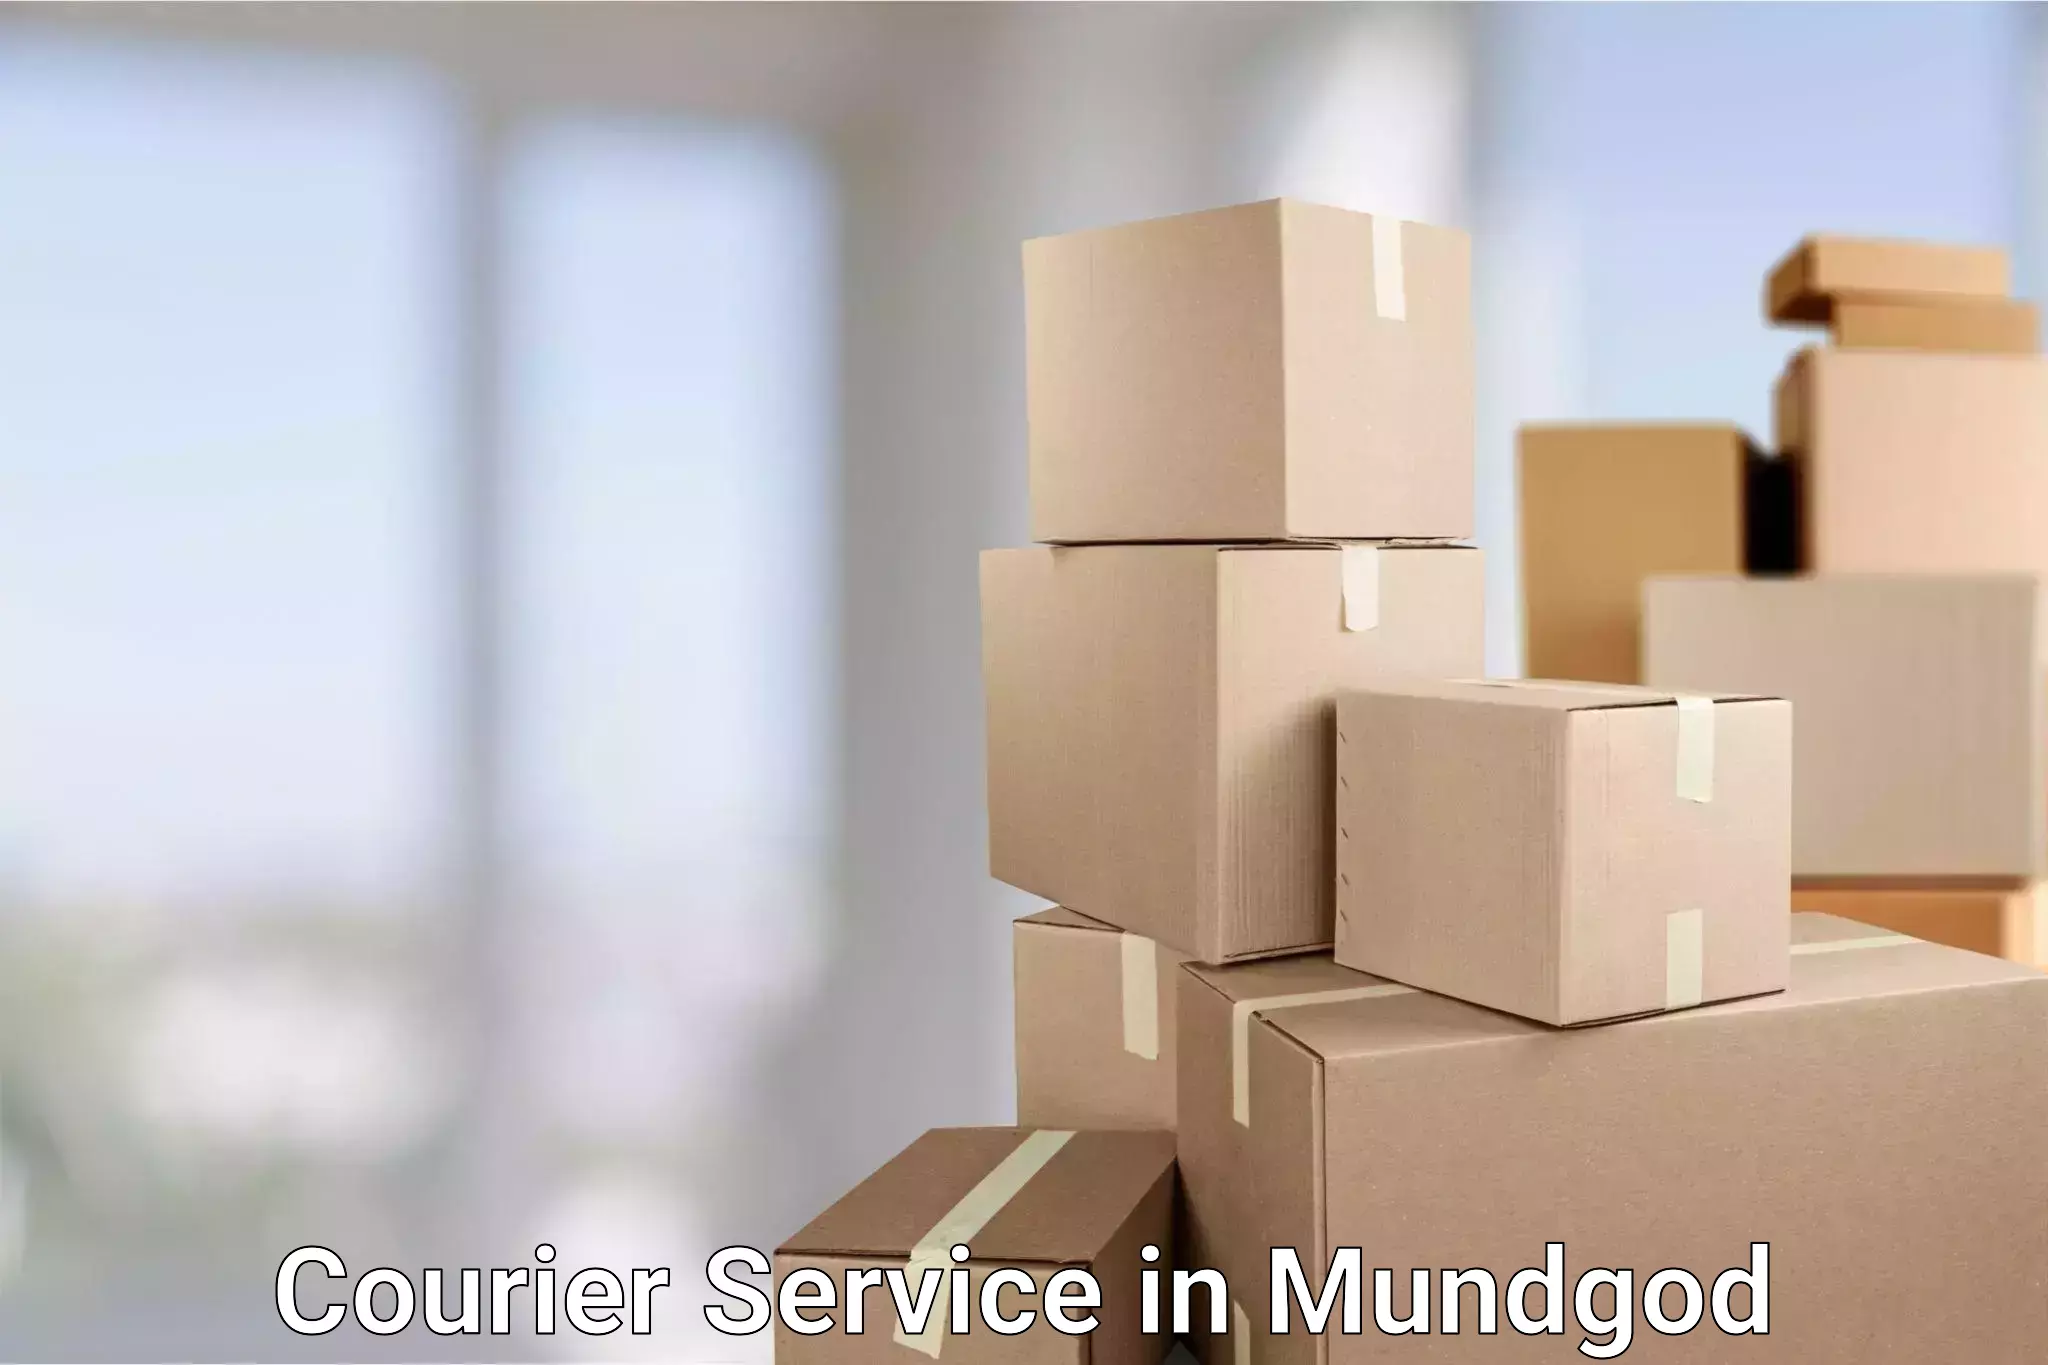 Express delivery network in Mundgod